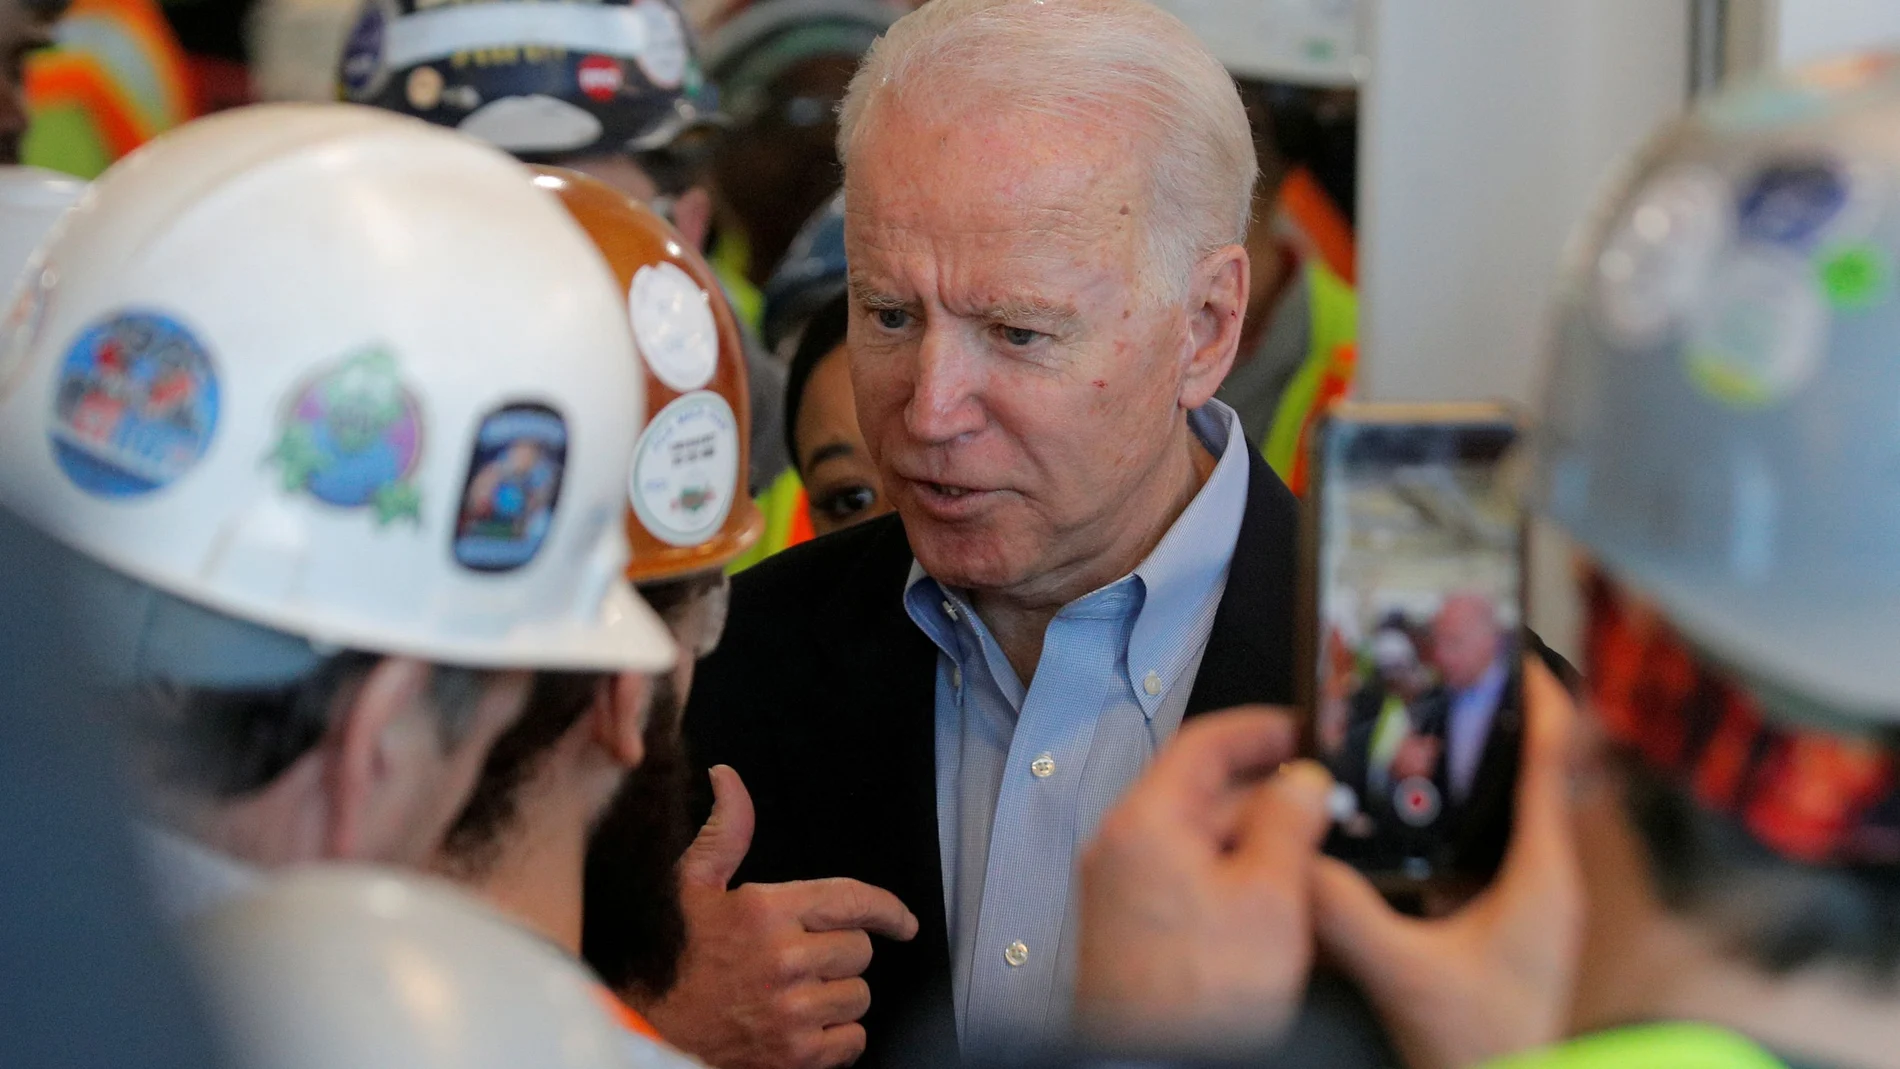 Democratic U.S. presidential candidate and former Vice President Joe Biden argues with a worker about his positions on gun control during a campaign stop at a plant in Detroit, Michigan